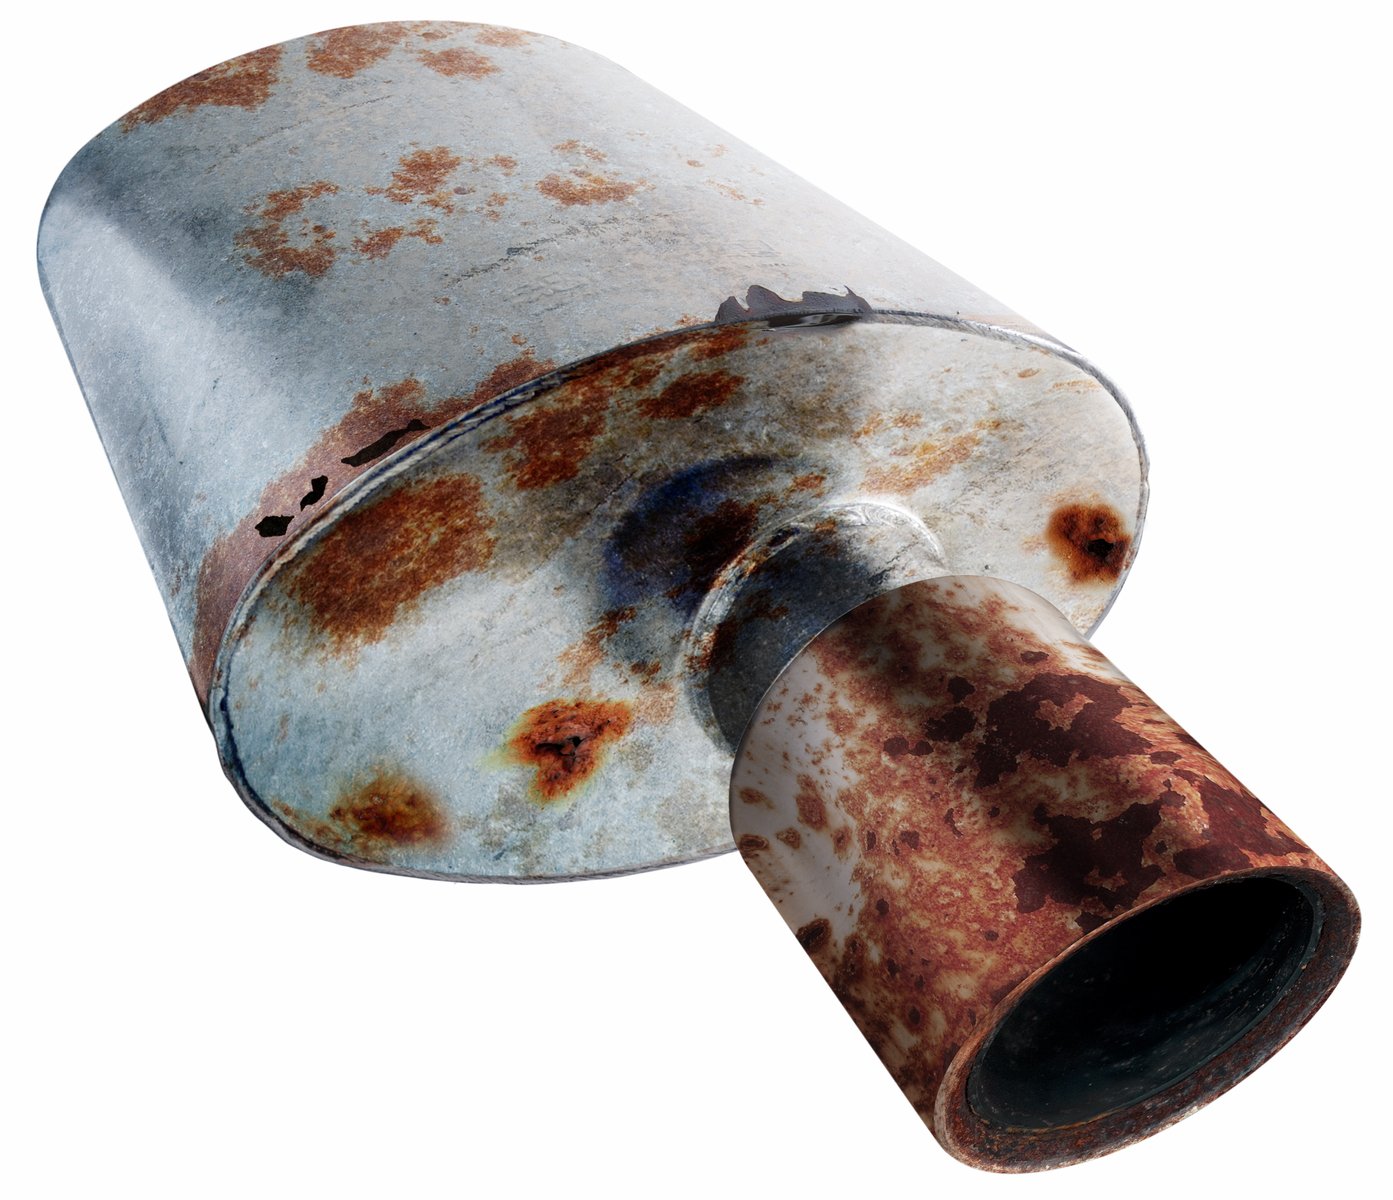 A old and rusty TCM forklift muffler